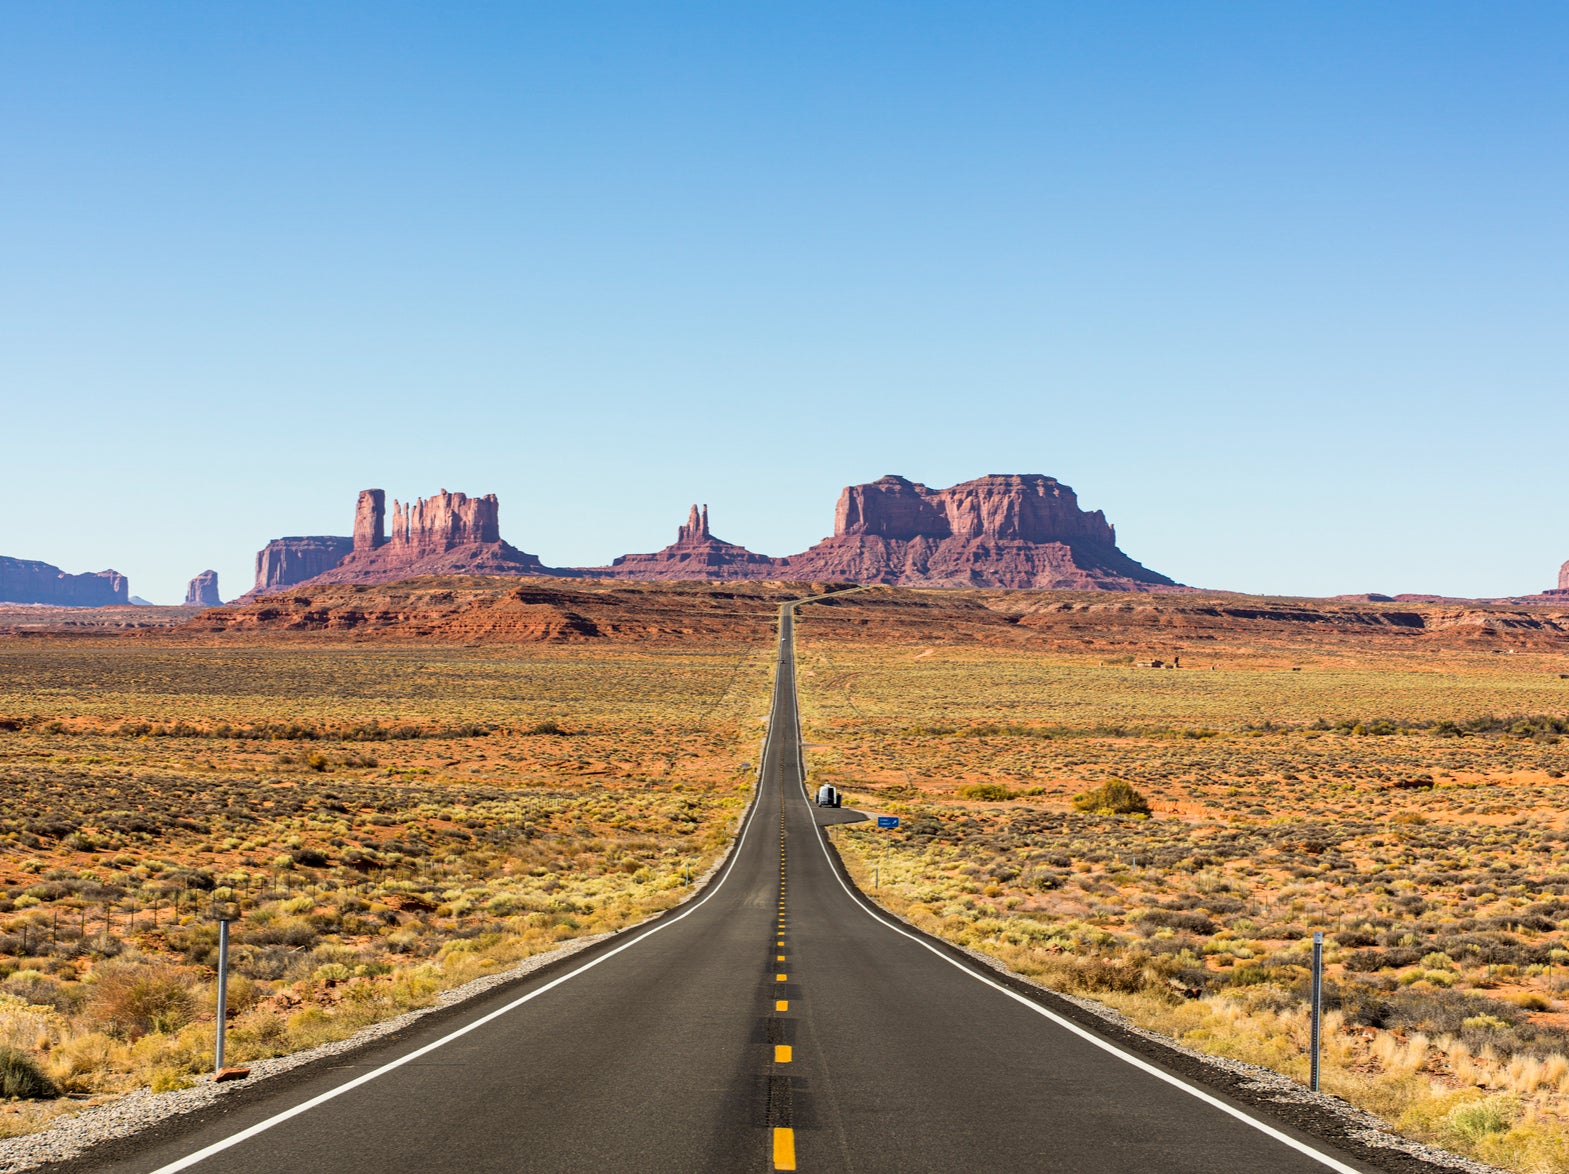 See the famous sights of Route 66 on a North American road trip